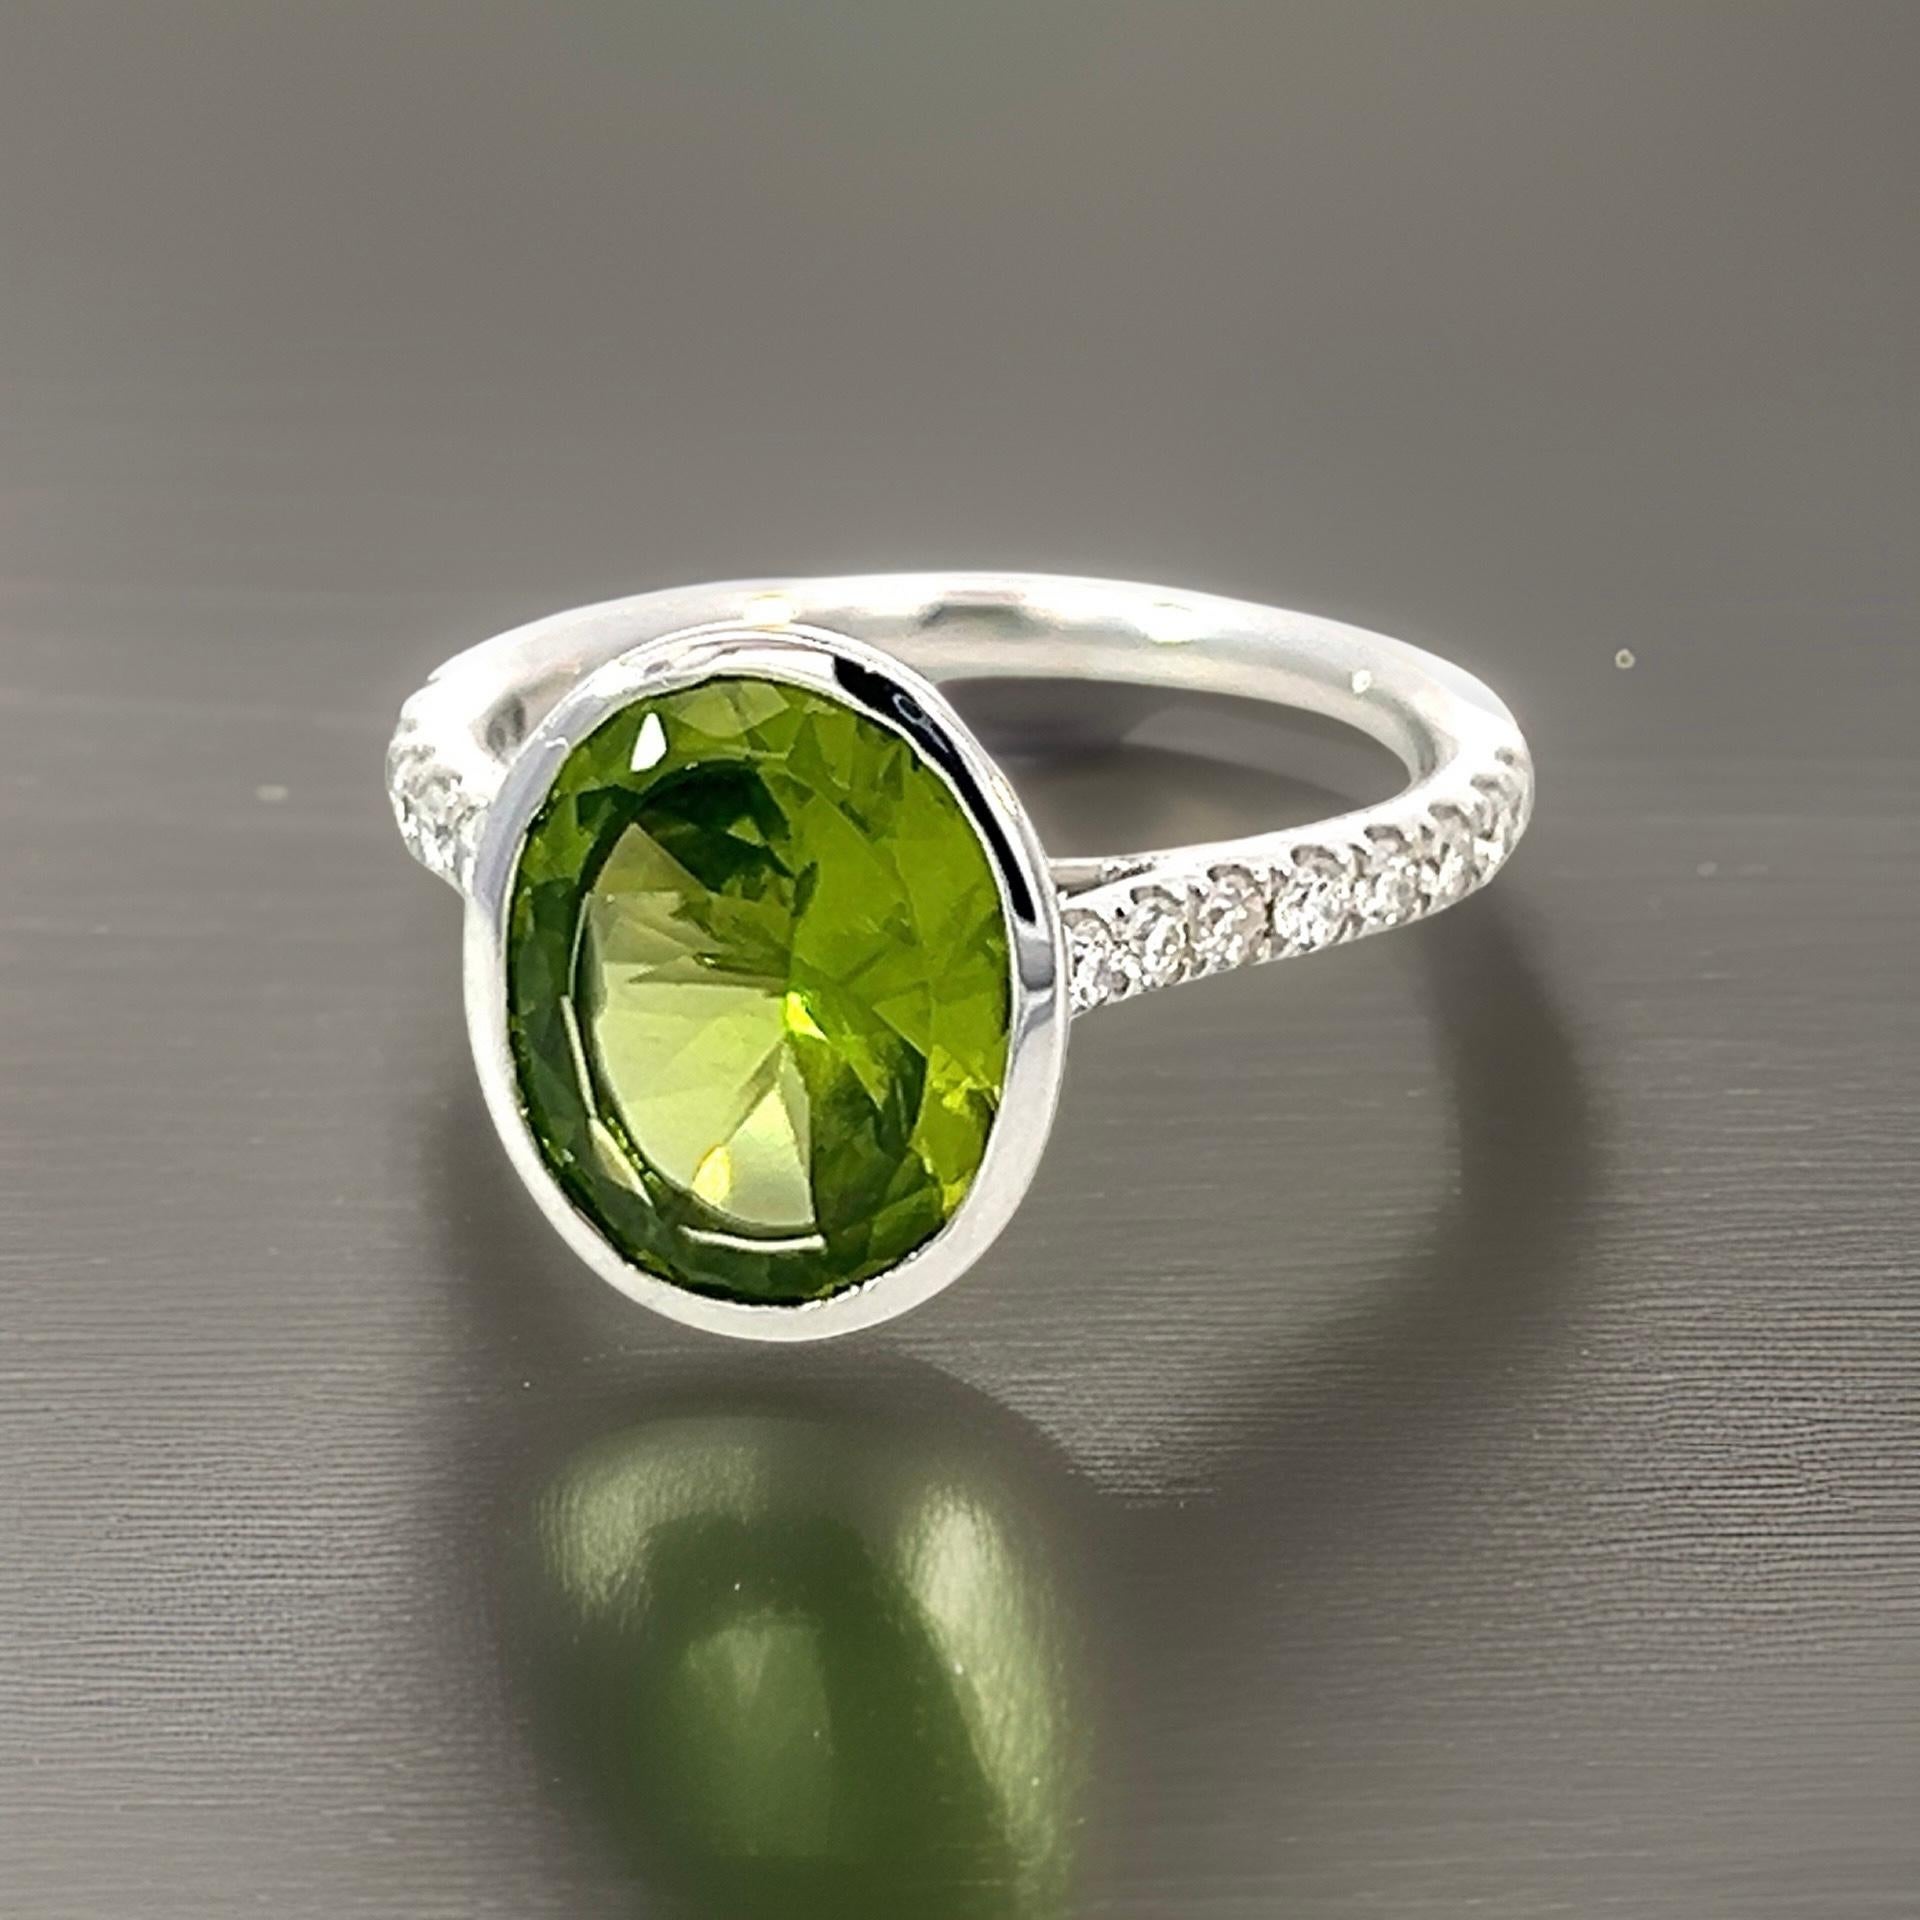 Natural Peridot Diamond Ring 6.5 14k W Gold 3.49 TCW Certified For Sale 8